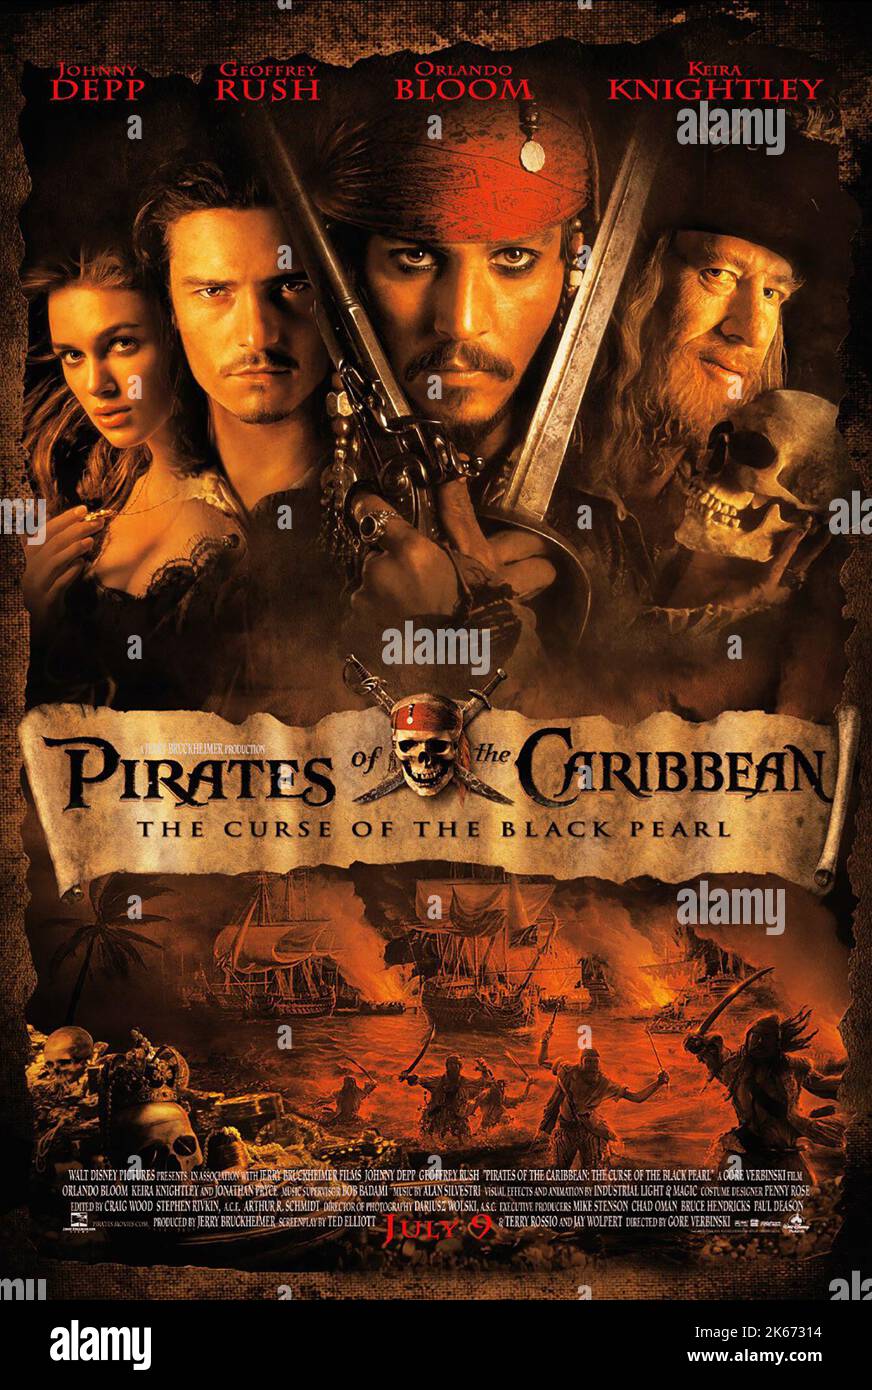 KEIRA KNIGHTLEY, ORLANDO BLOOM, JOHNNY DEPP, GEOFFREY RUSH, PIRATES OF THE CARIBBEAN: THE CURSE OF THE BLACK PEARL, 2003 Stock Photo